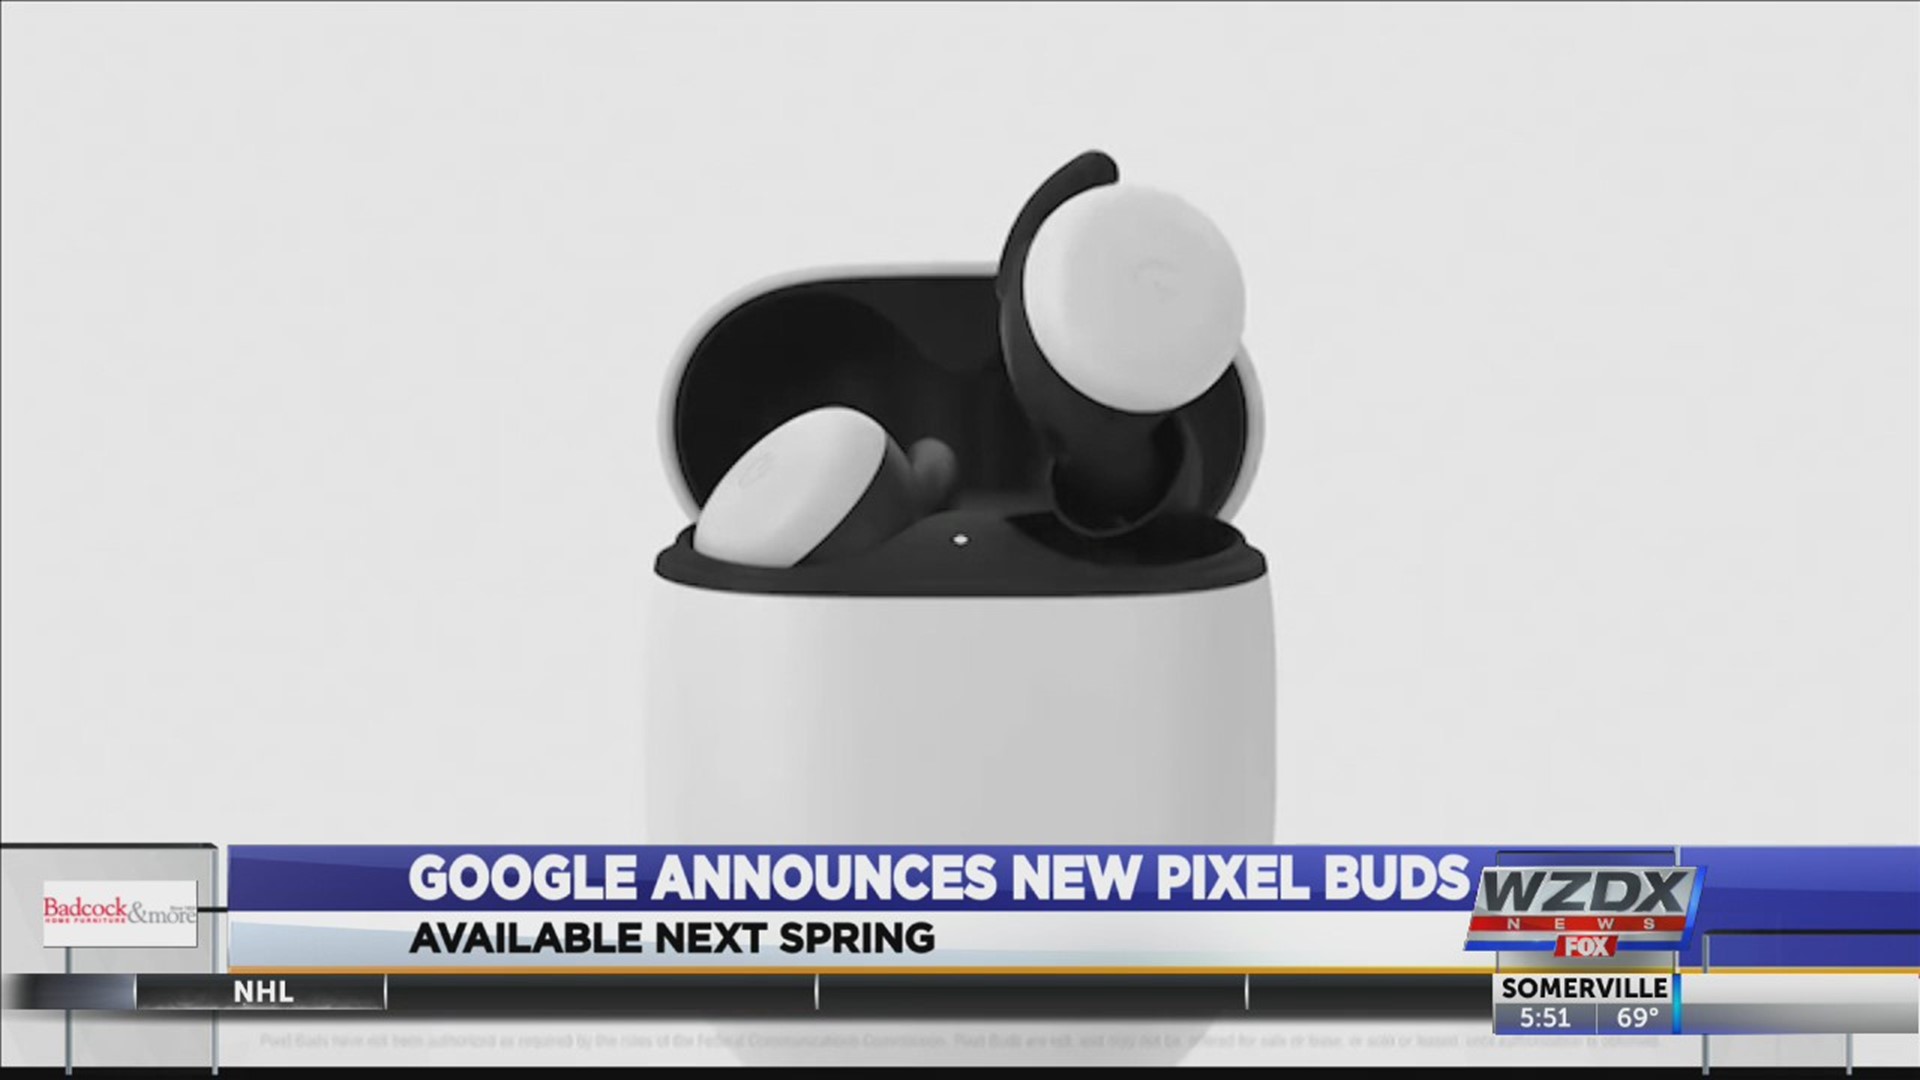 Google announced its latest generation of its Pixel Buds wireless headphones.